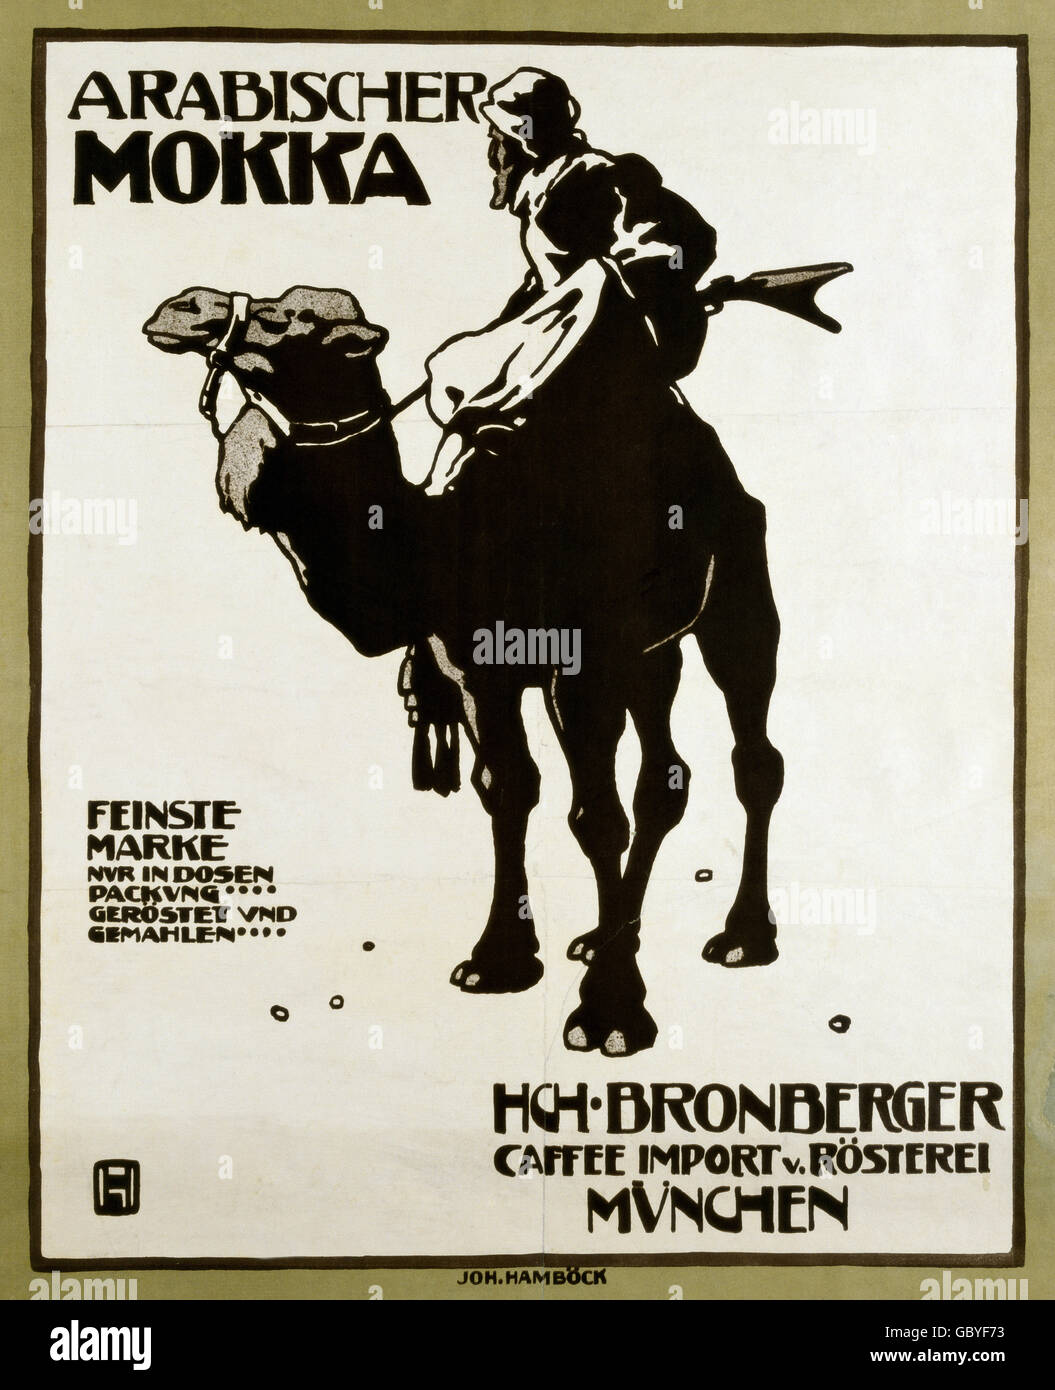 advertising, beverages, coffee, Arabian mocha coffee, Caffee Import Bronberger, printed by Johann Hamboeck, Munich, 1920s, Additional-Rights-Clearences-Not Available Stock Photo